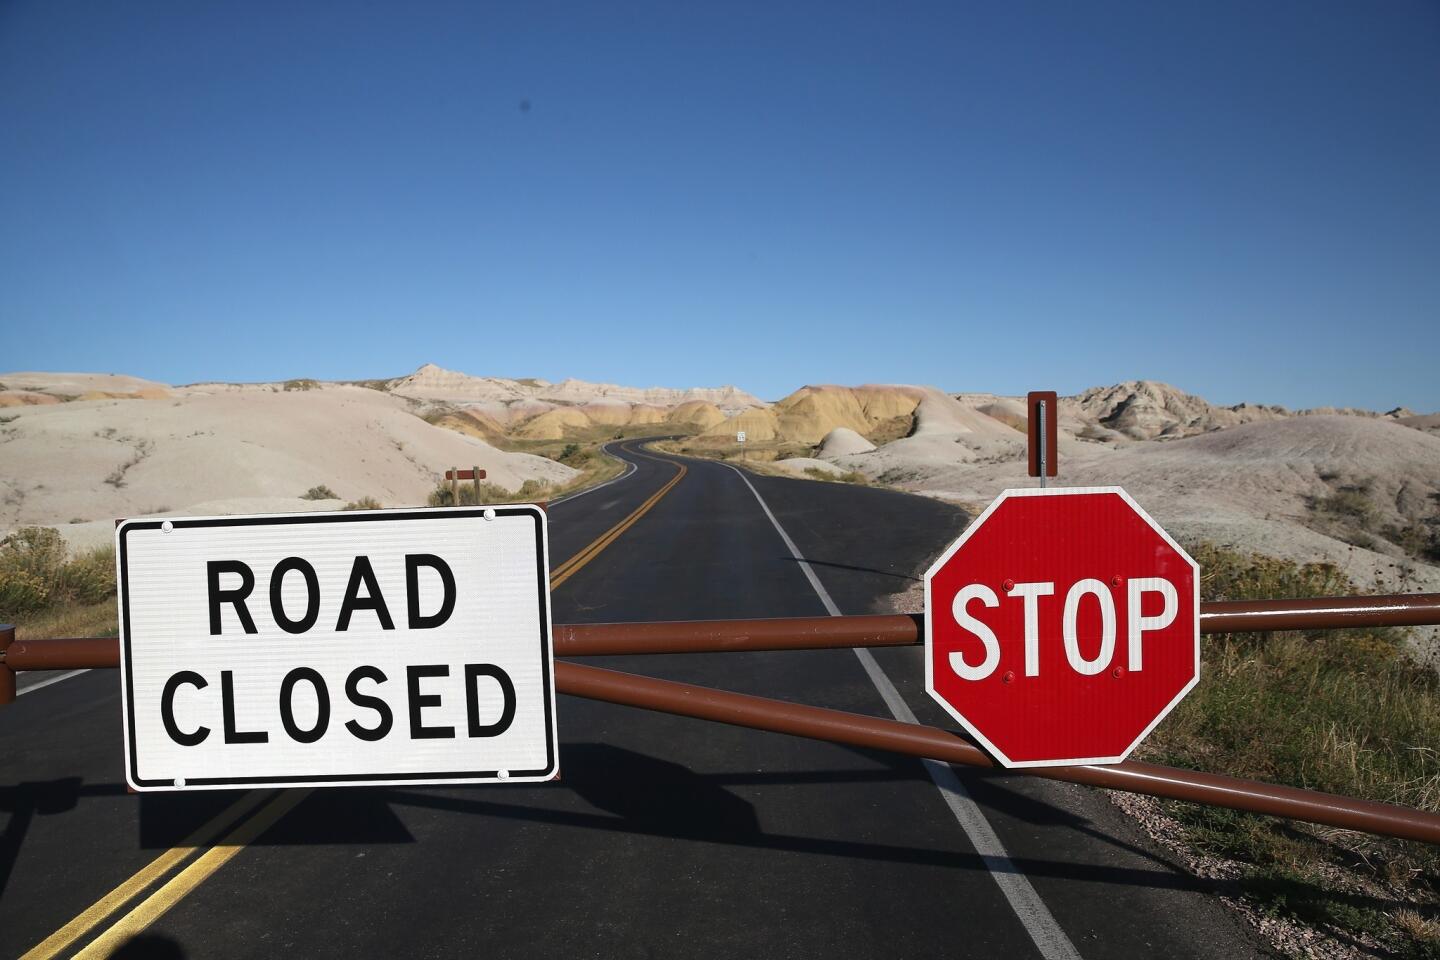 A barricade prevents visitors from entering the interior of the Badlands National Park near Wall, S.D. All national parks were closed after Congress failed to pass a temporary funding bill.